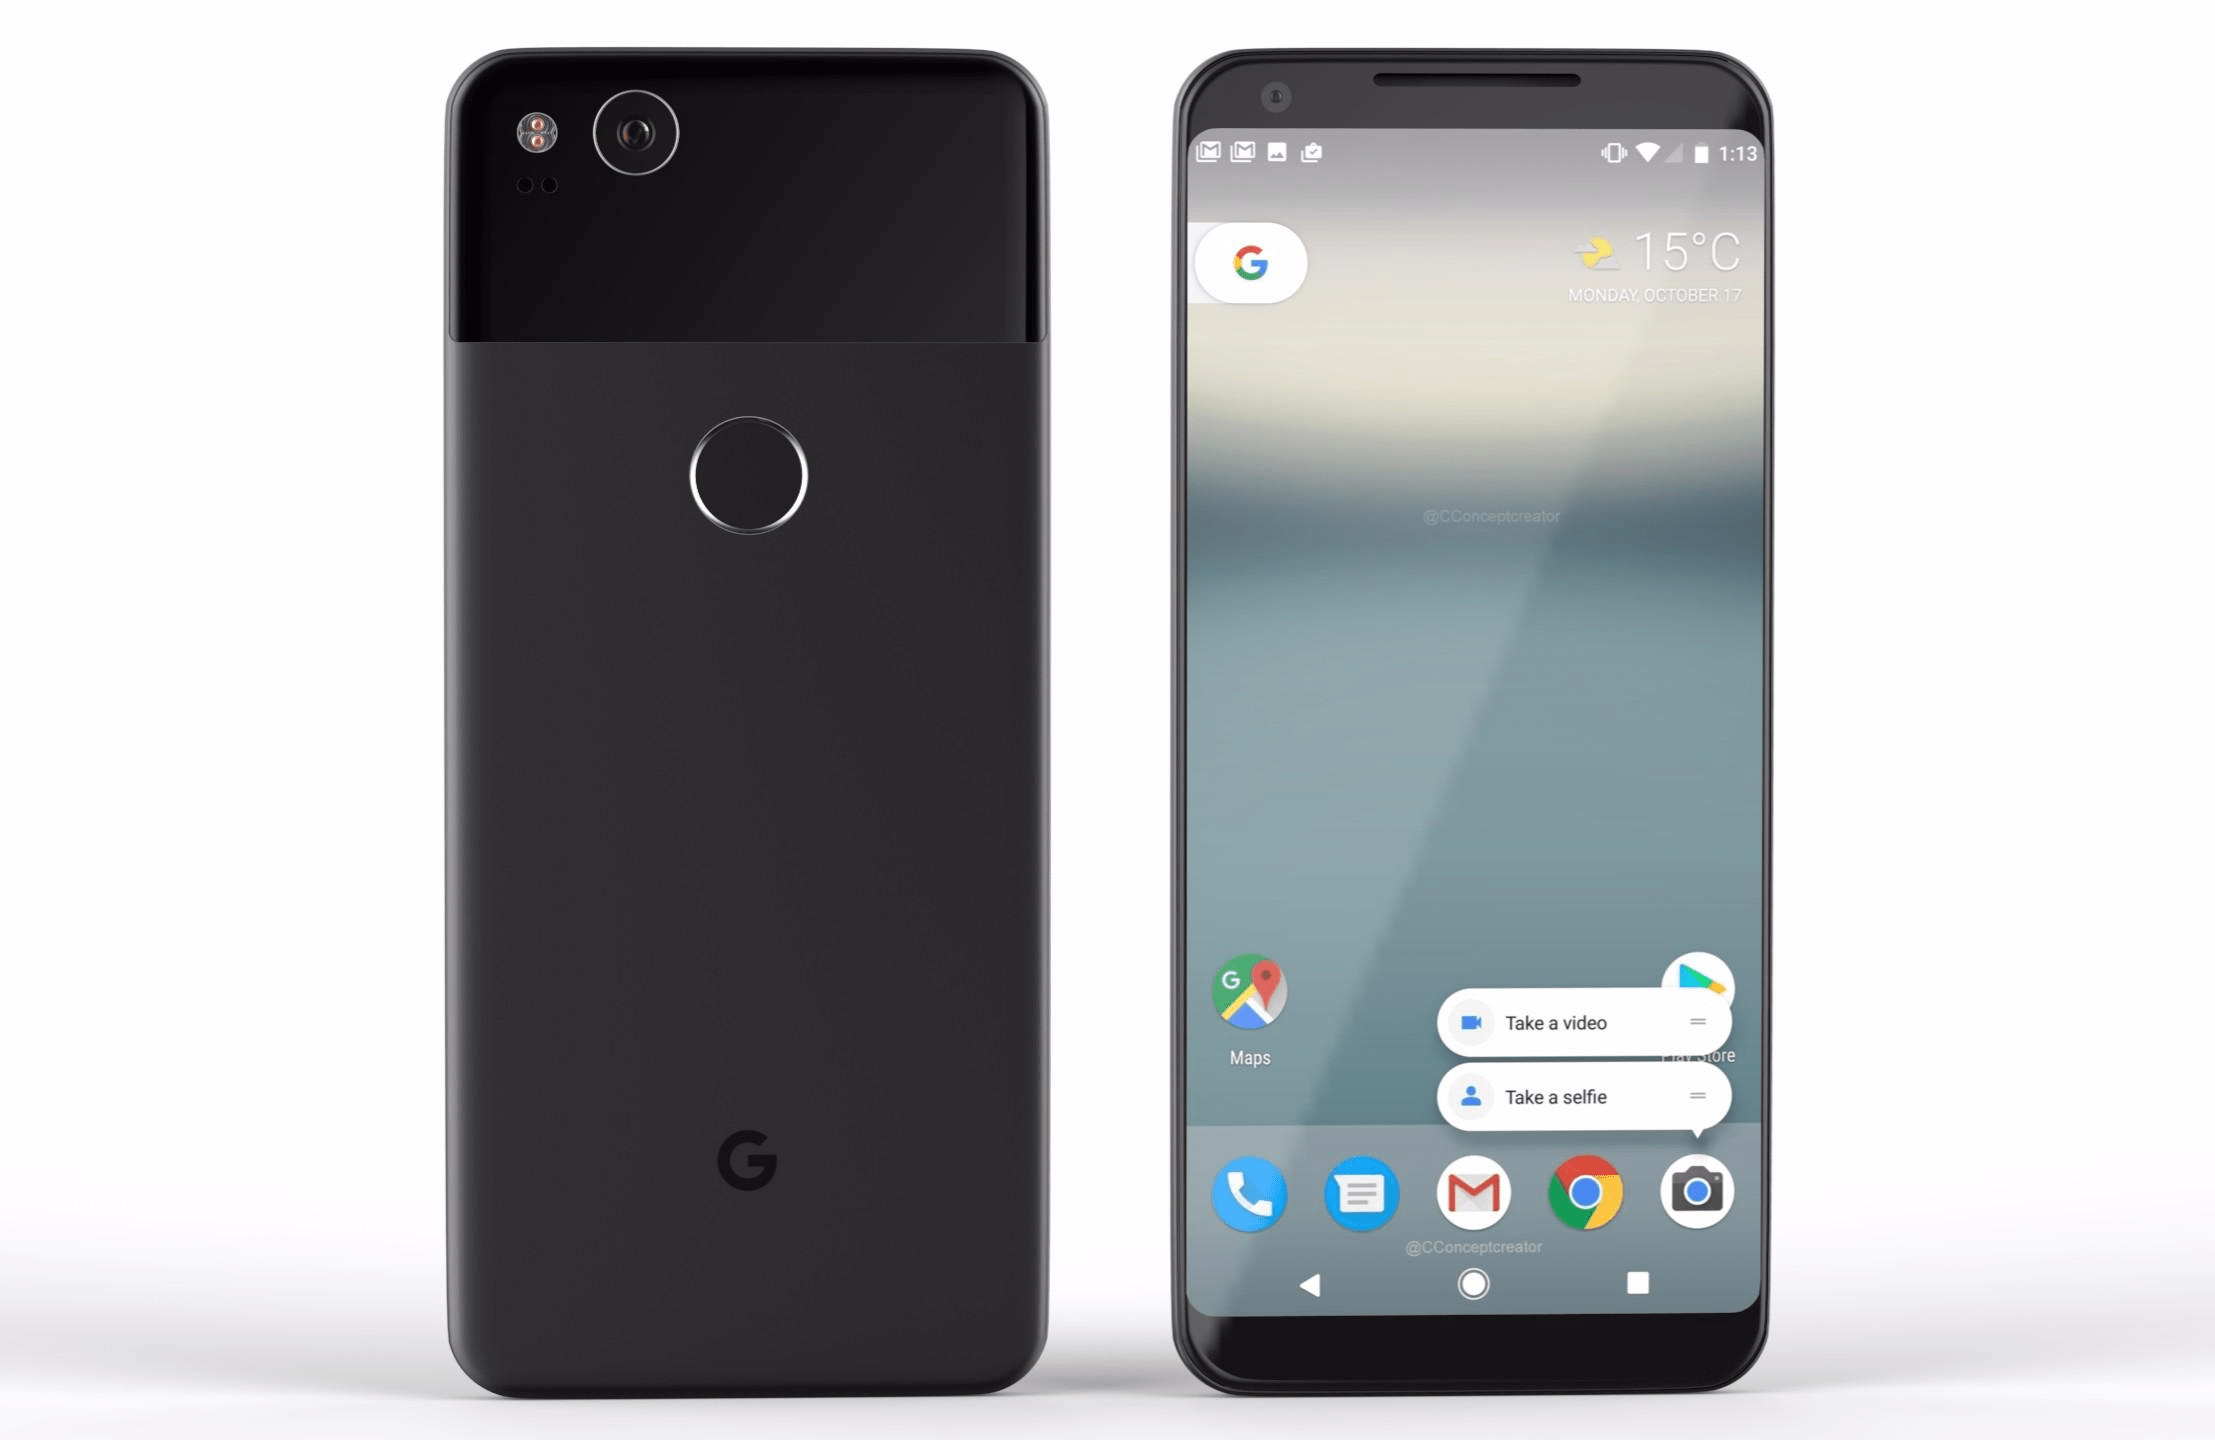 Google Pixel 2 - Full Specifications leaked